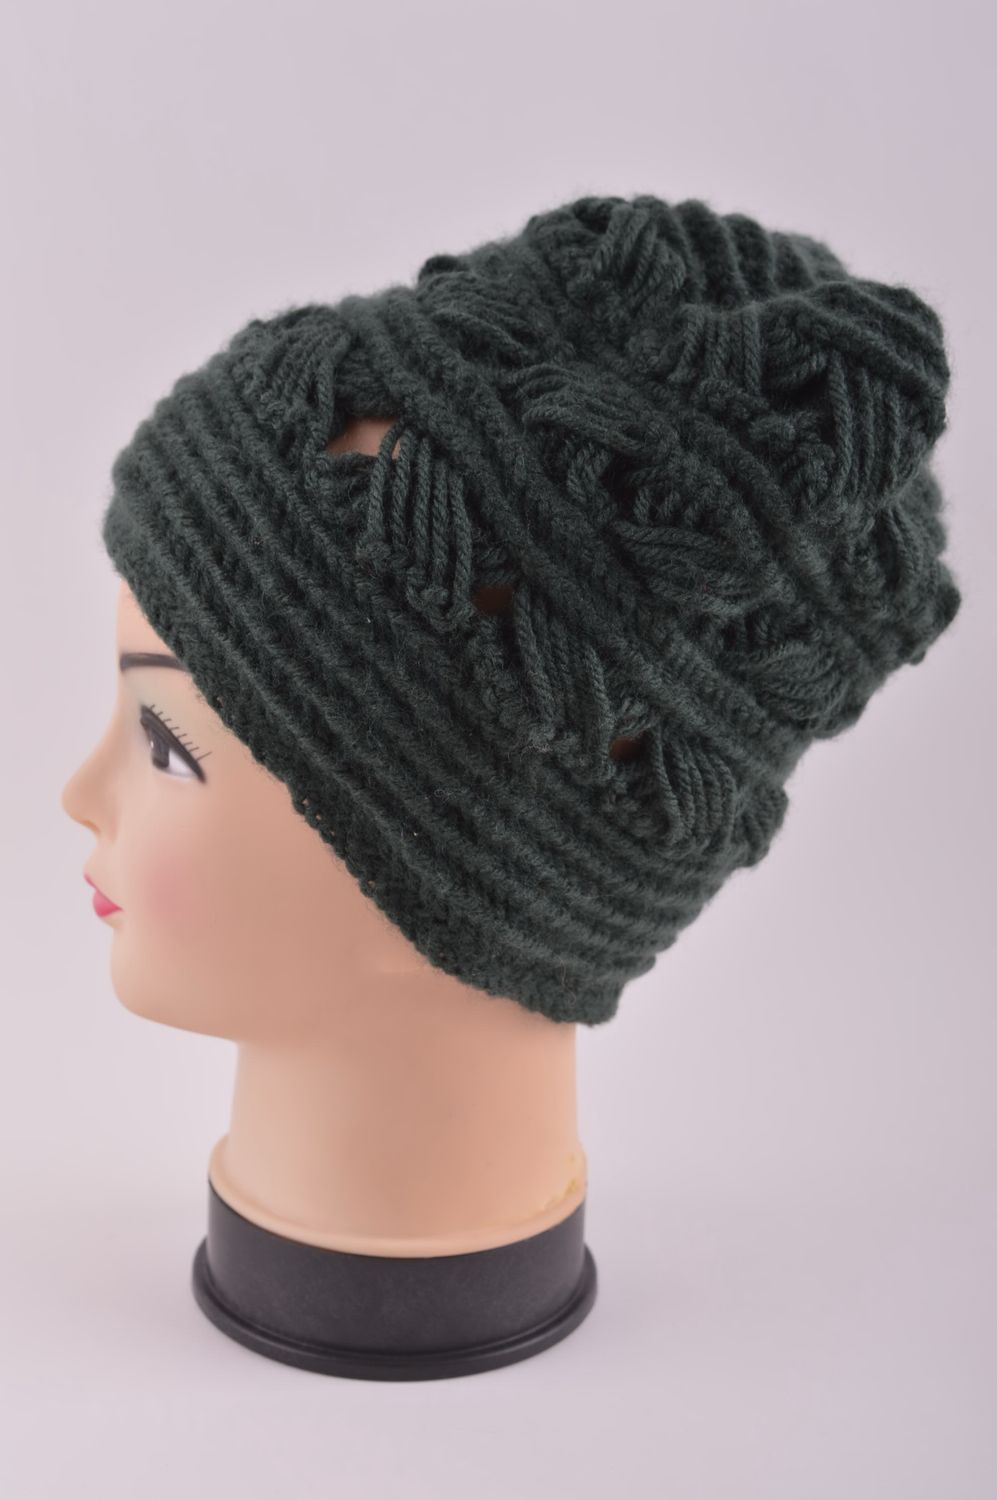 Handmade knitted hat fashion hat for women winter accessories for girls photo 3